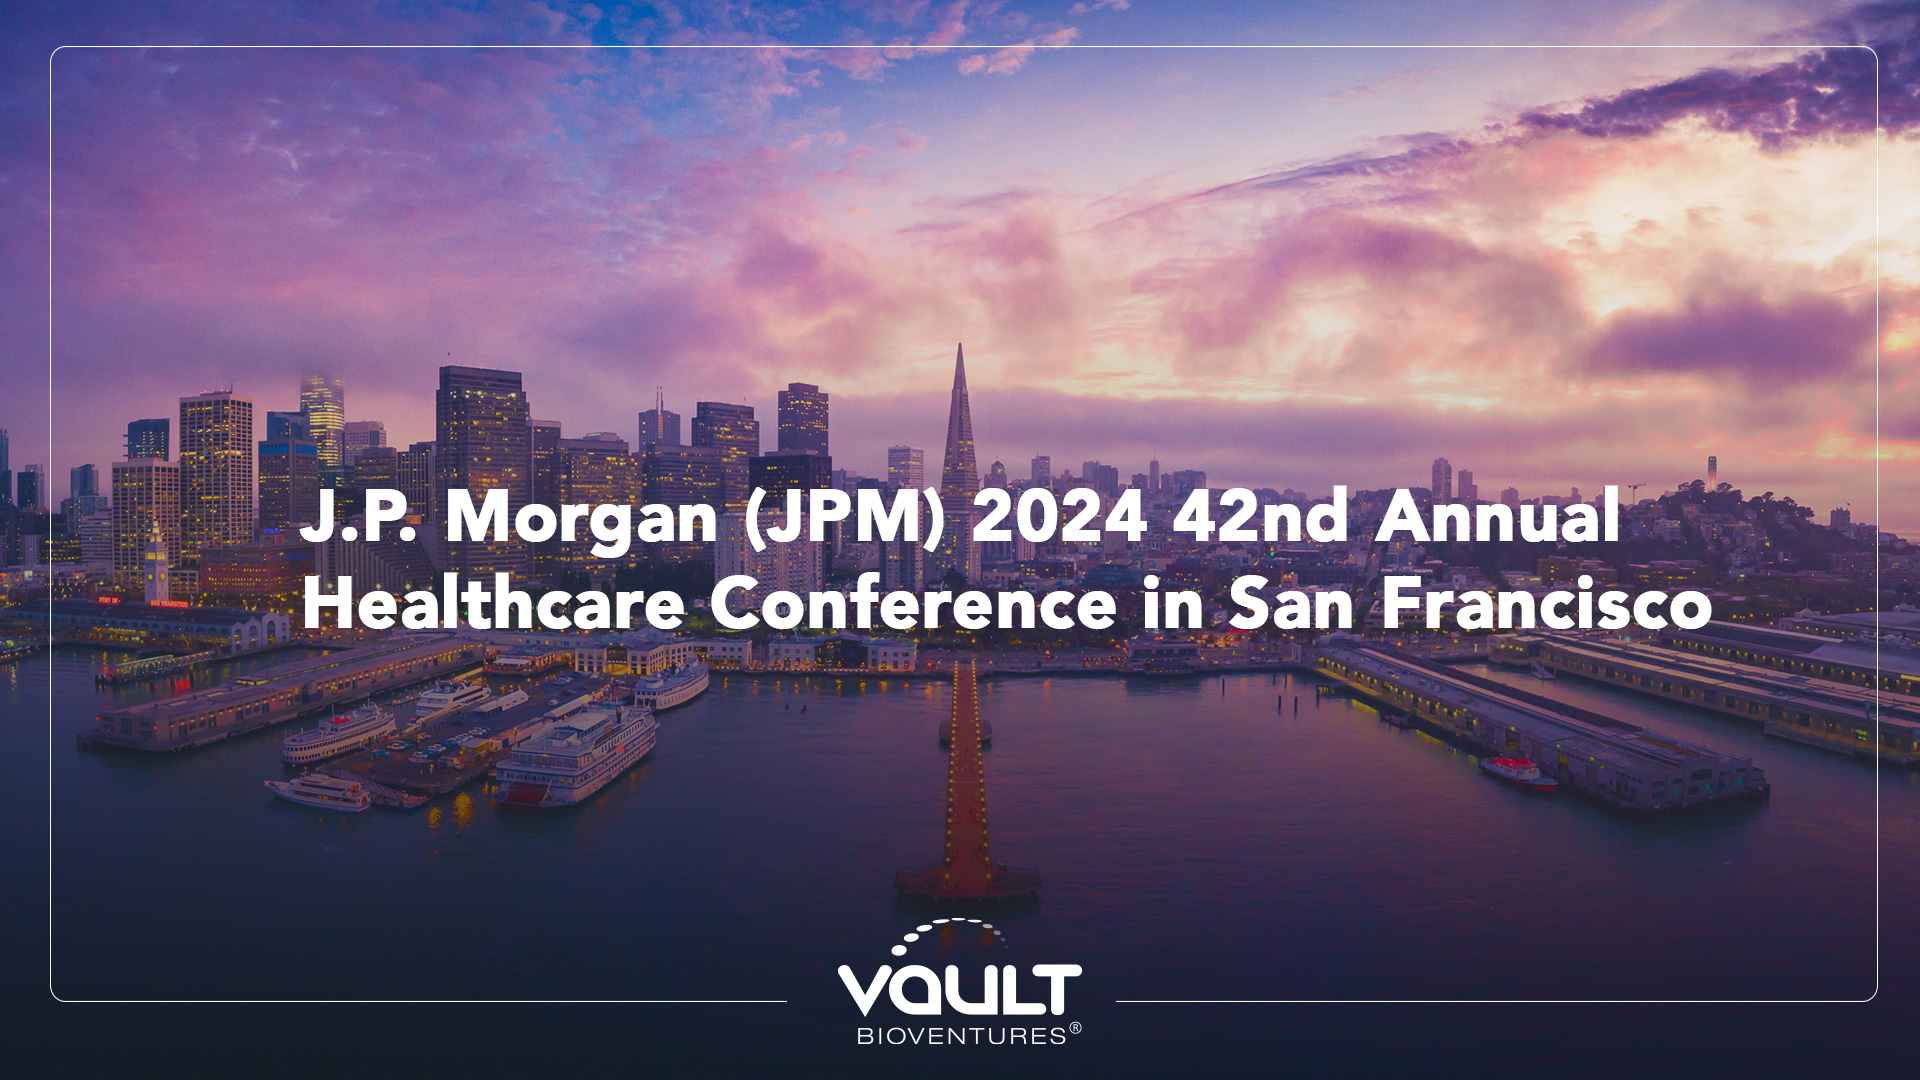 J.P. Morgan (JPM) 2024 42nd Annual Healthcare Conference in San Francisco